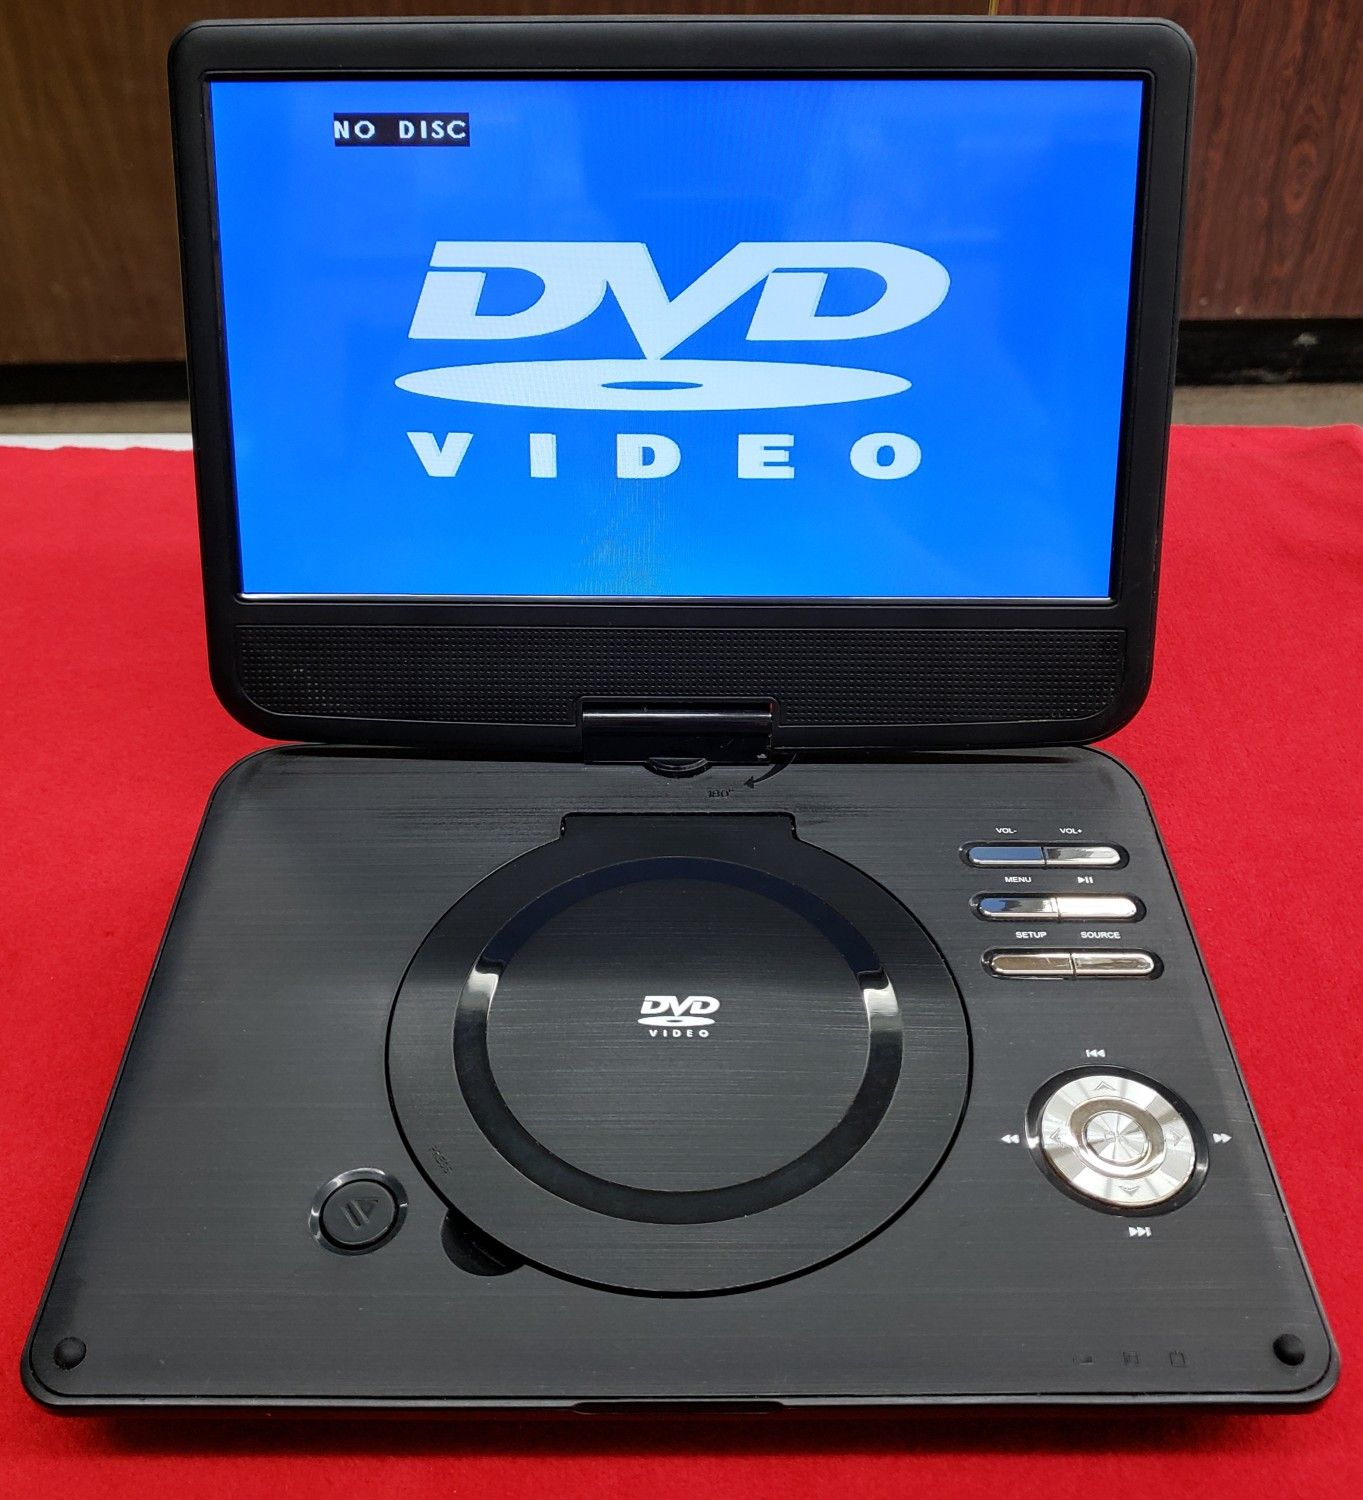 ONN 10-Inch LCD Swivel Display Portable DVD Player, w/ Charger, Working